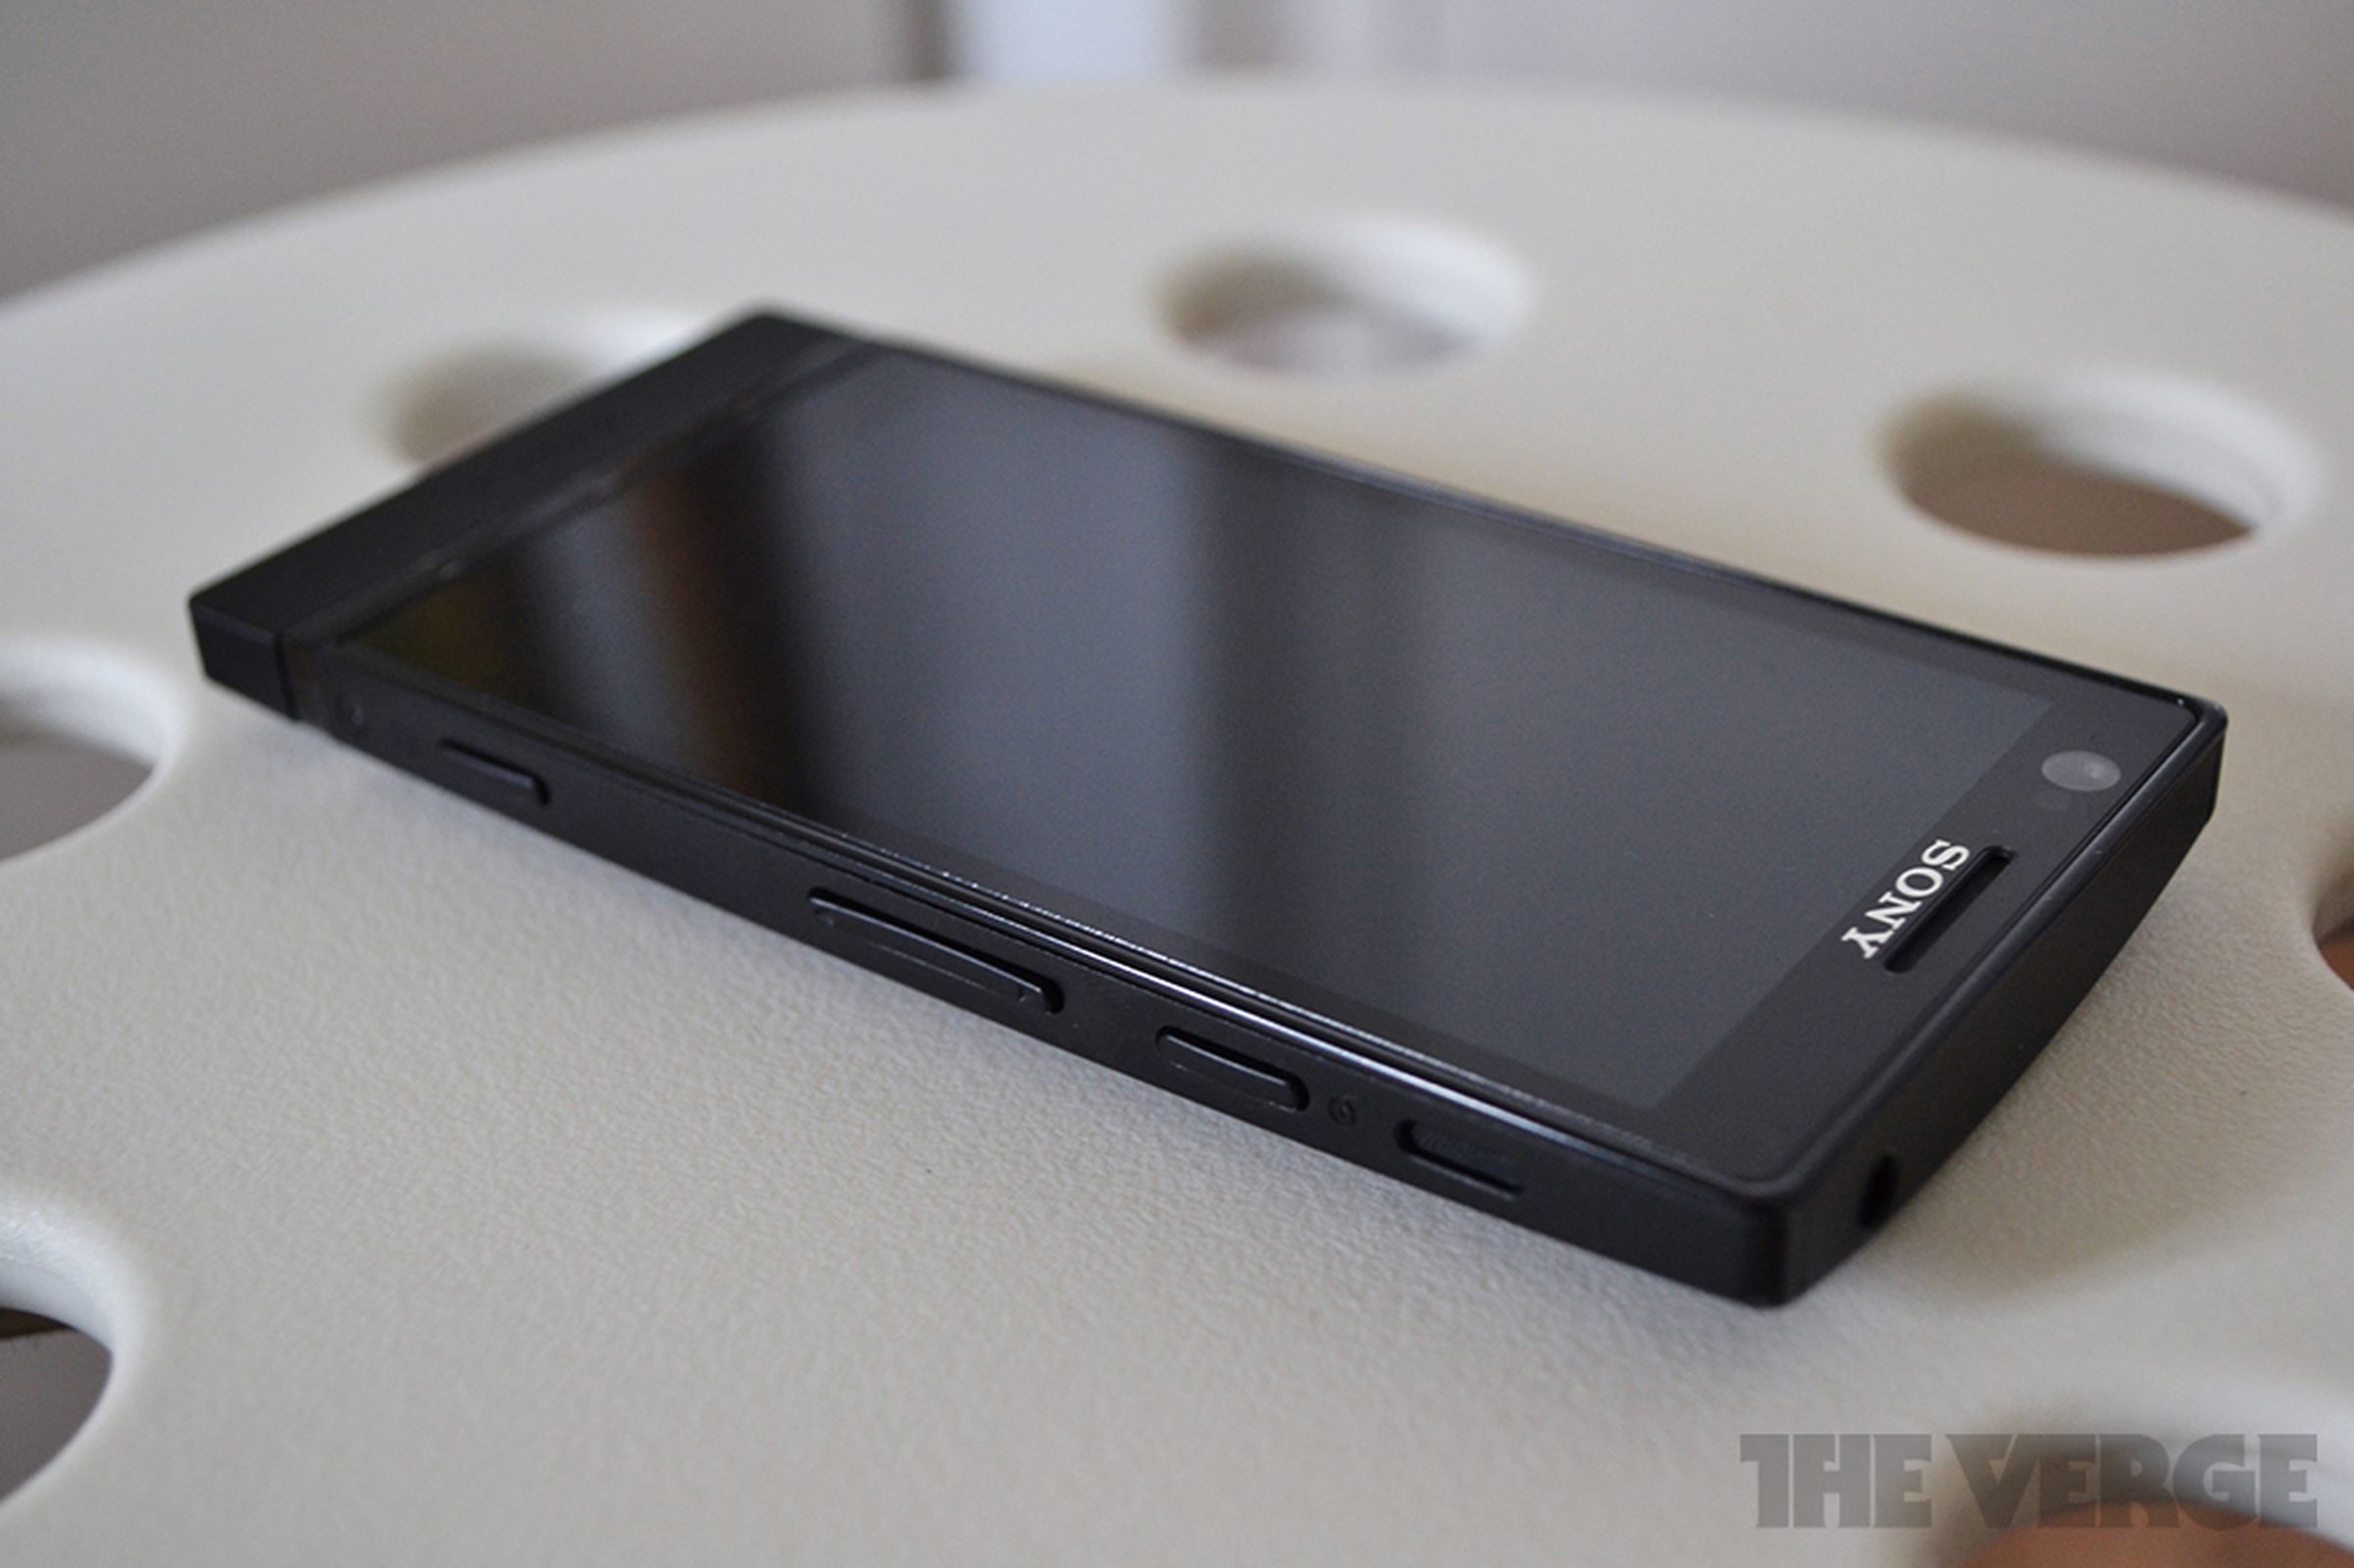 Xperia P hands-on images